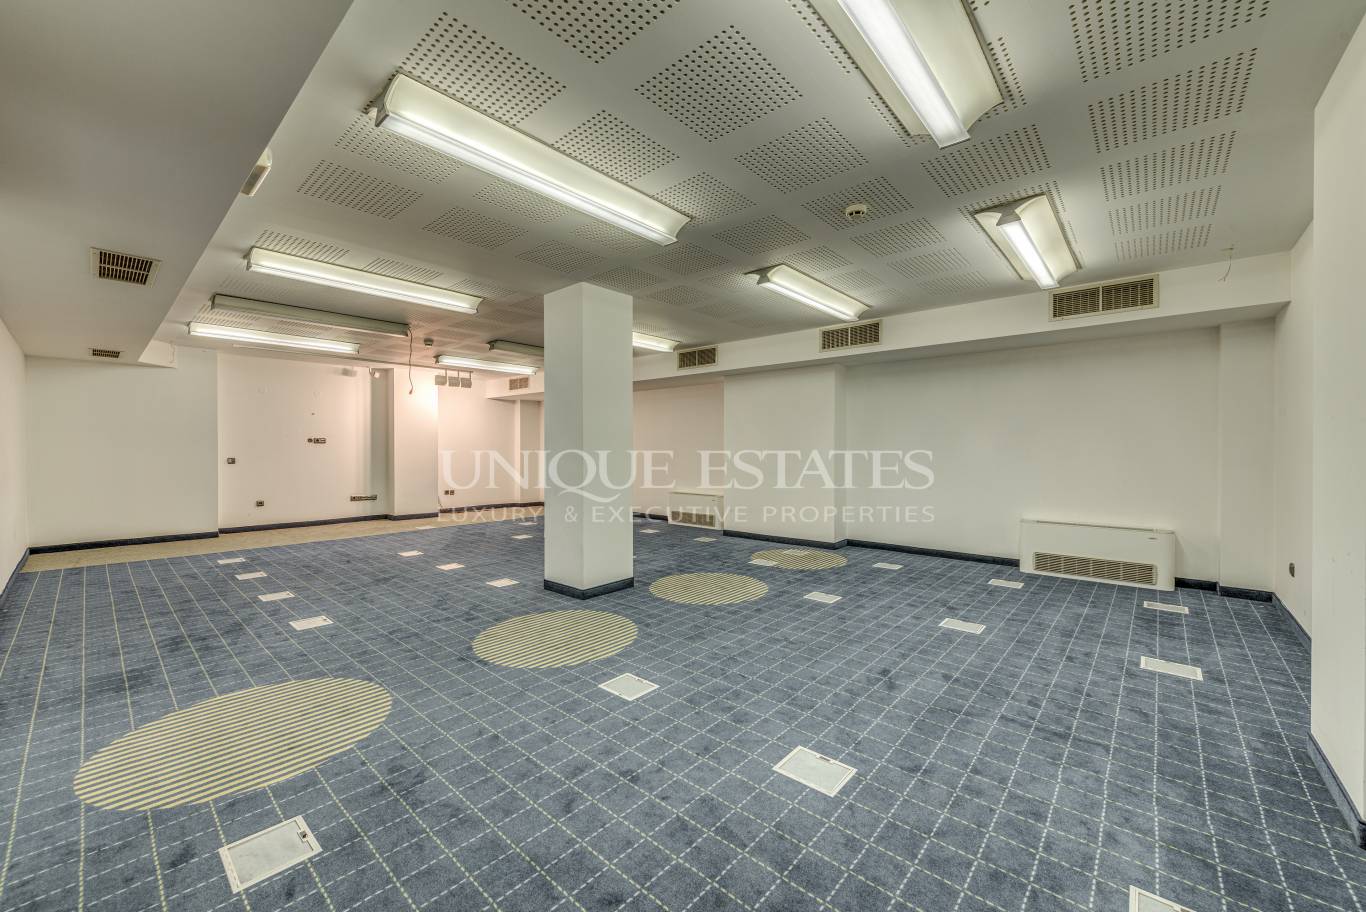 Office for rent in Sofia, Downtown with listing ID: K13585 - image 11